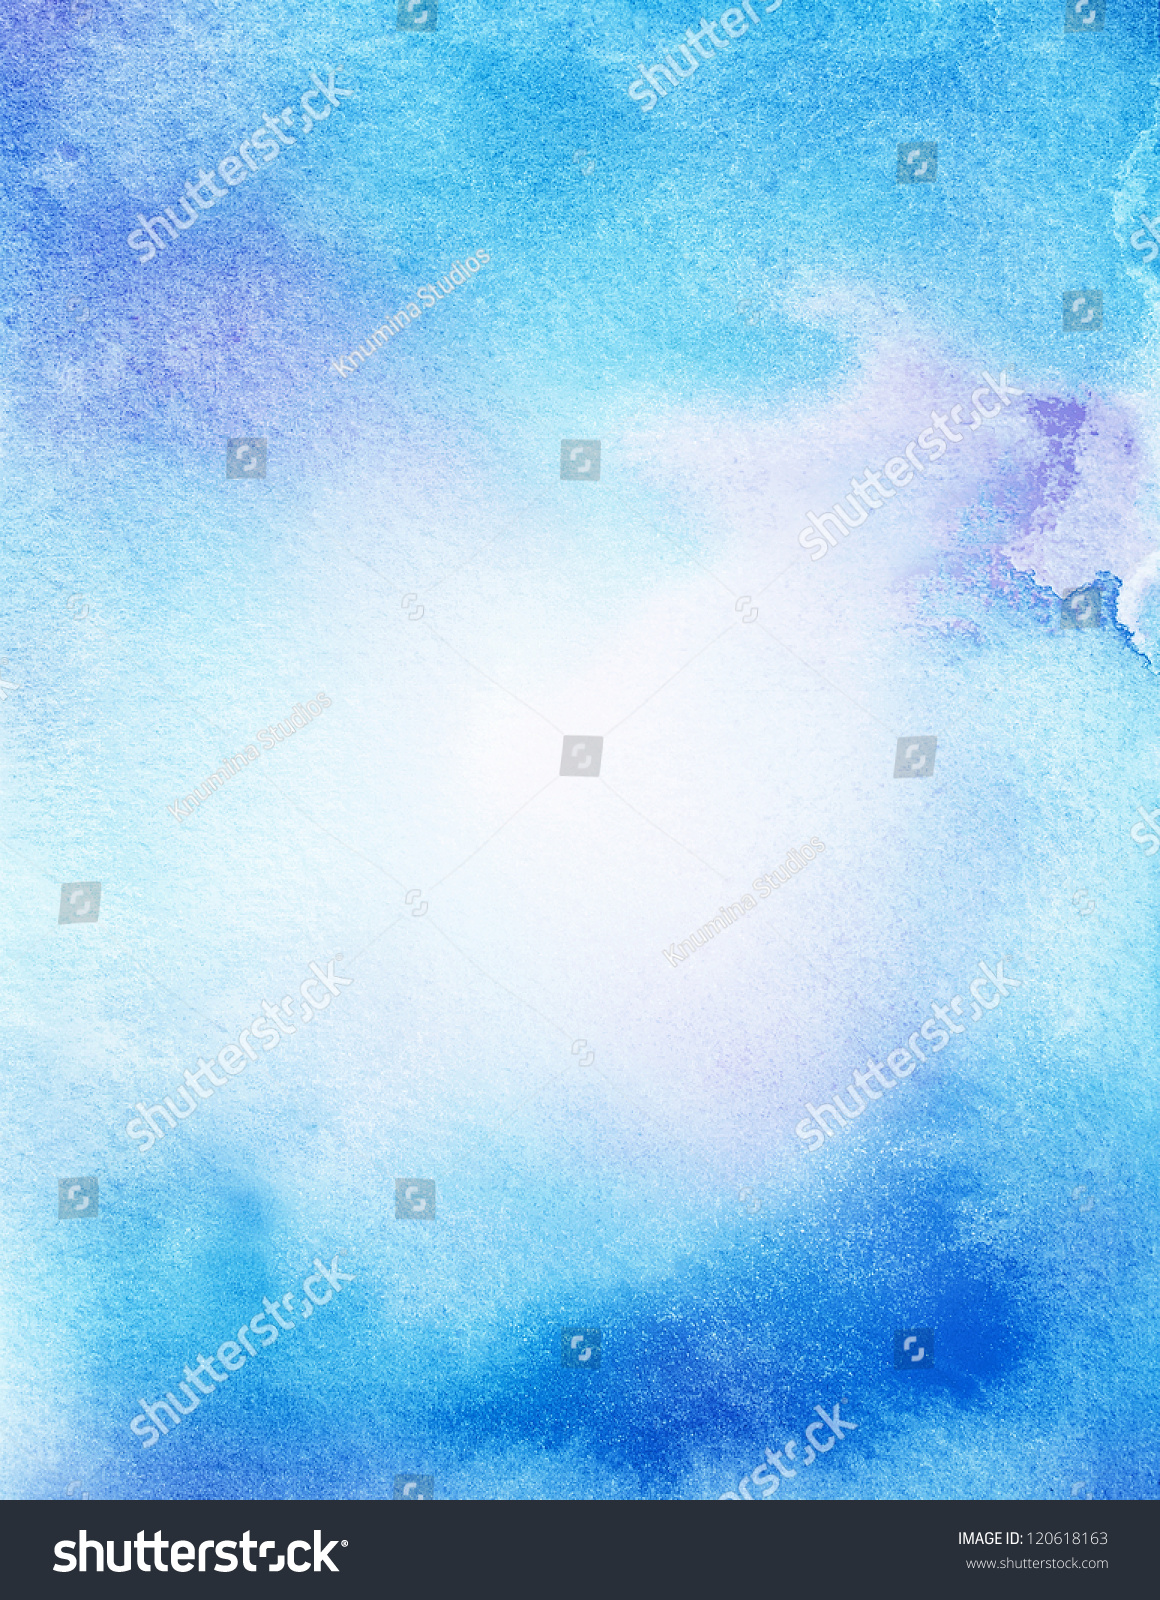 Download Abstract Background 85 X 11 Inch Stock Illustration 120618163